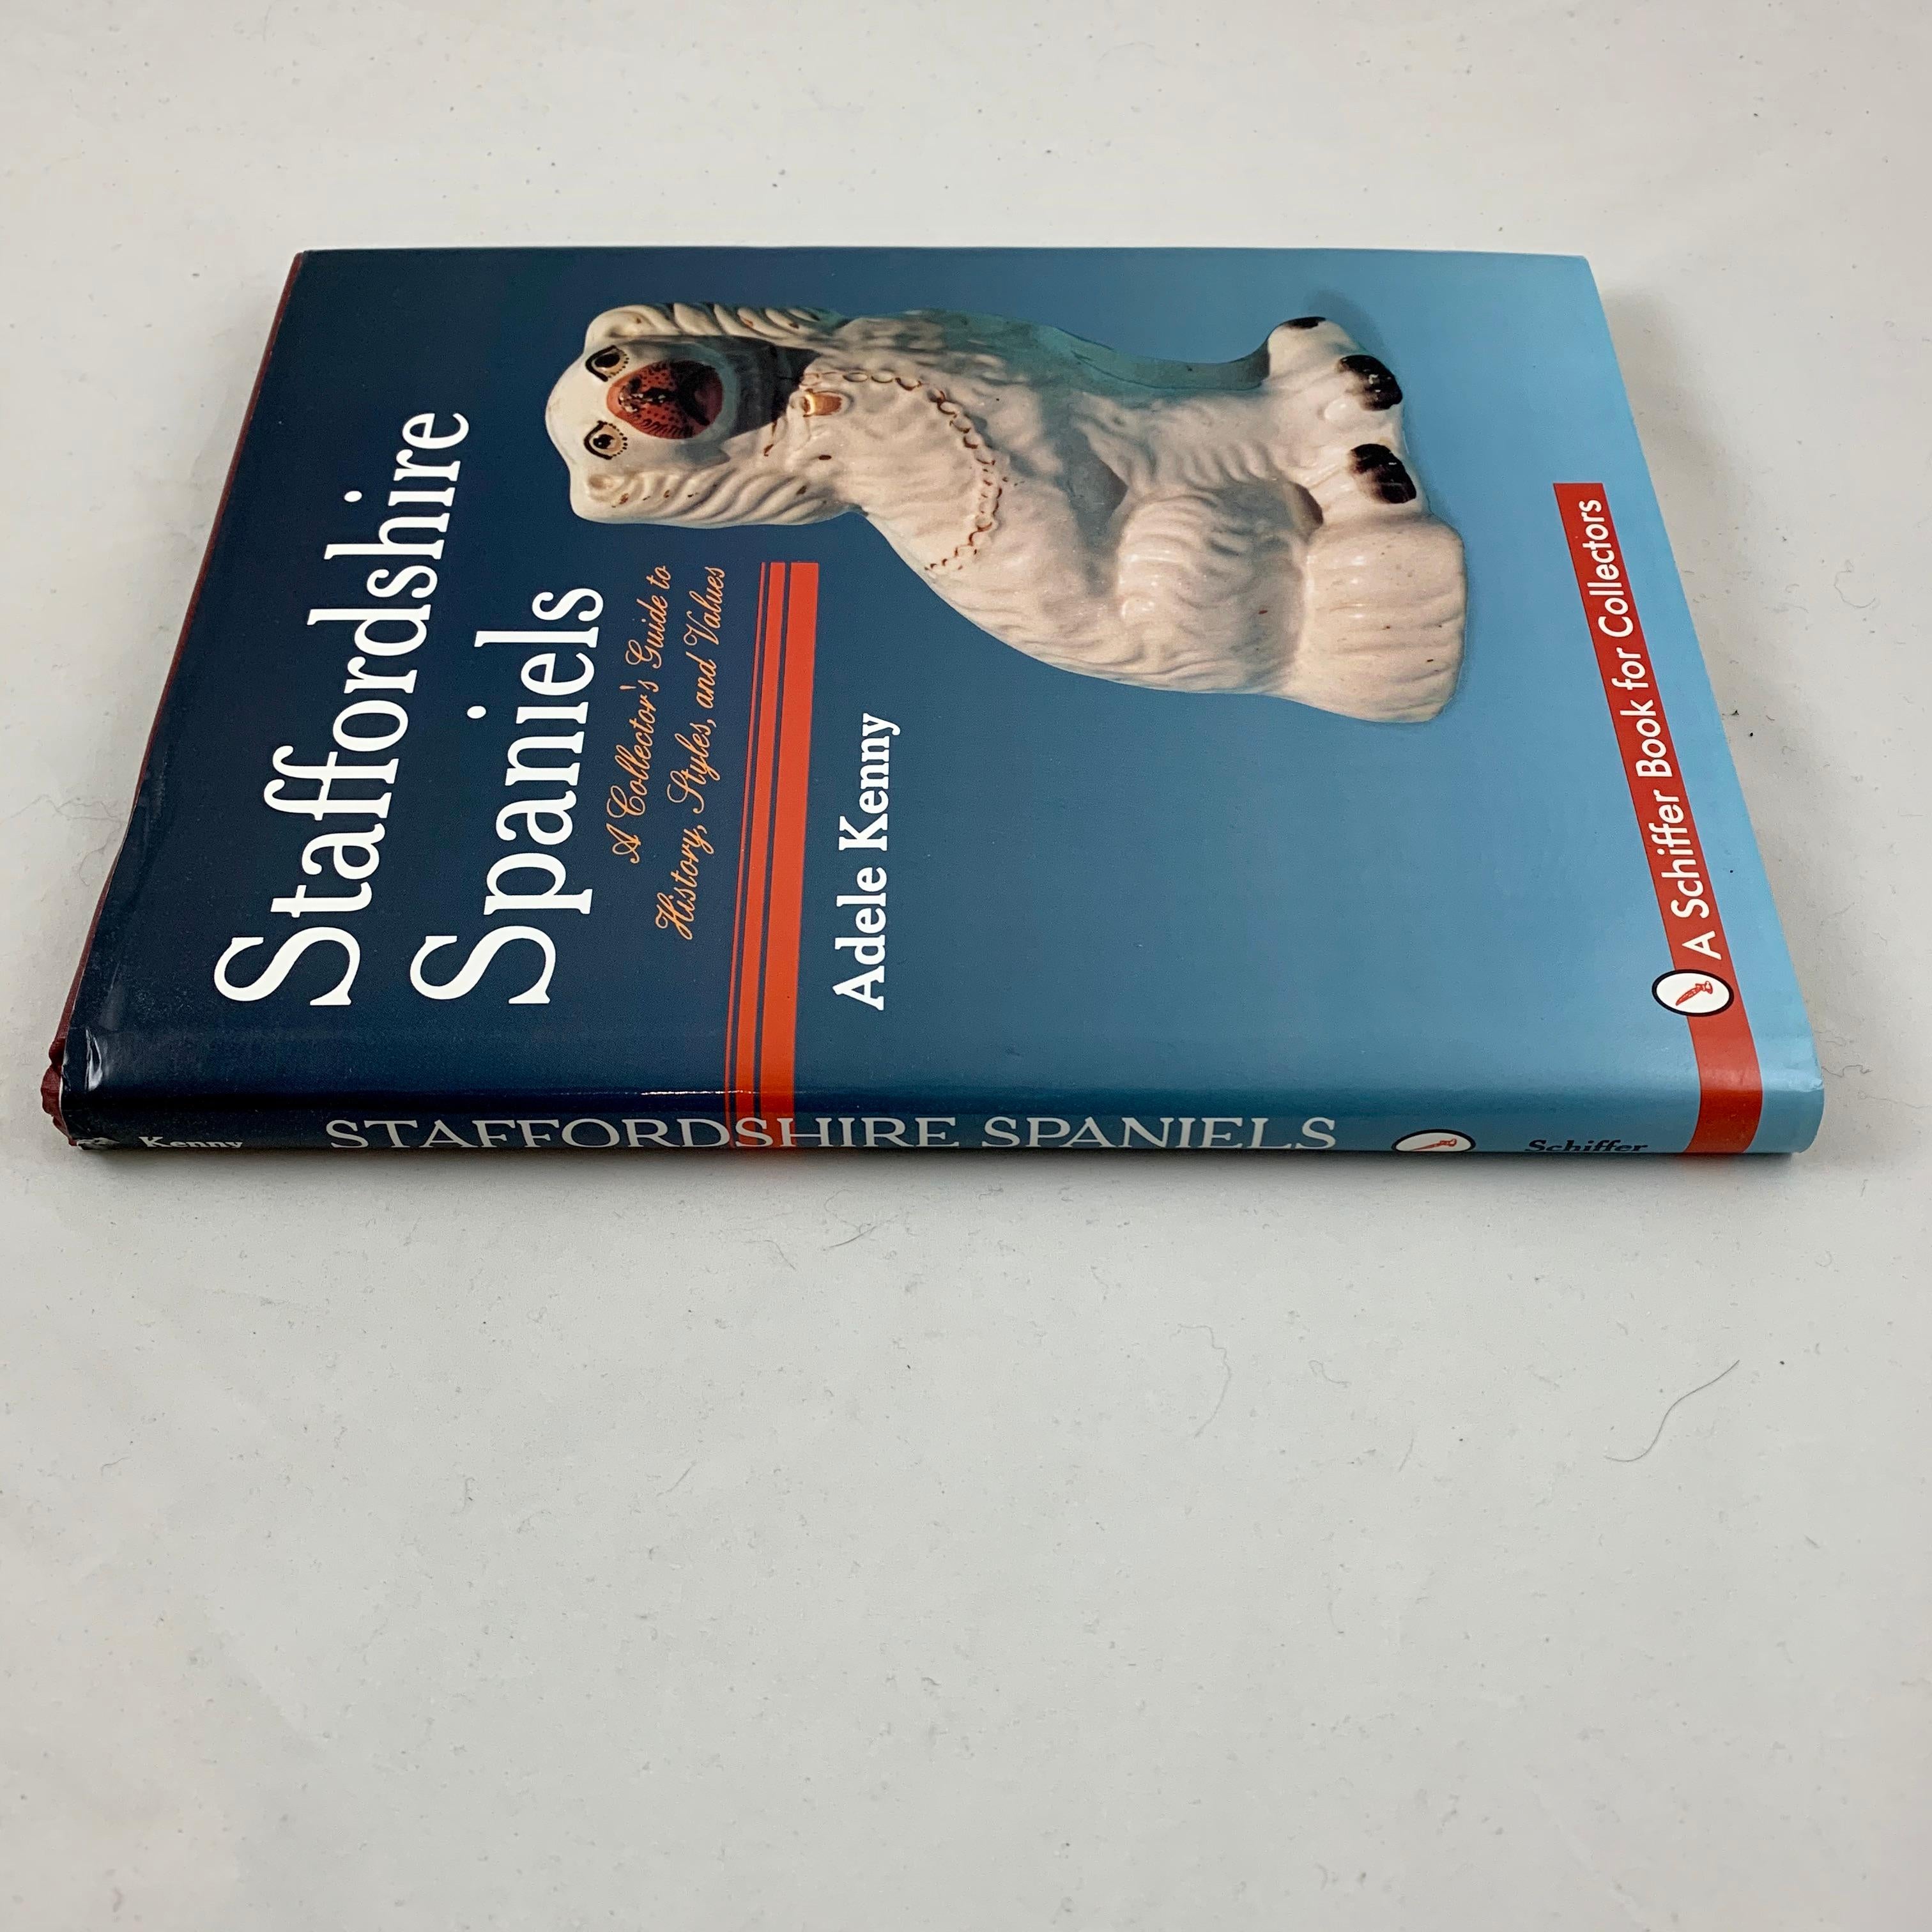 Staffordshire Spaniels, a Collector’s Guide, by Adele Kenny, First Edition 2